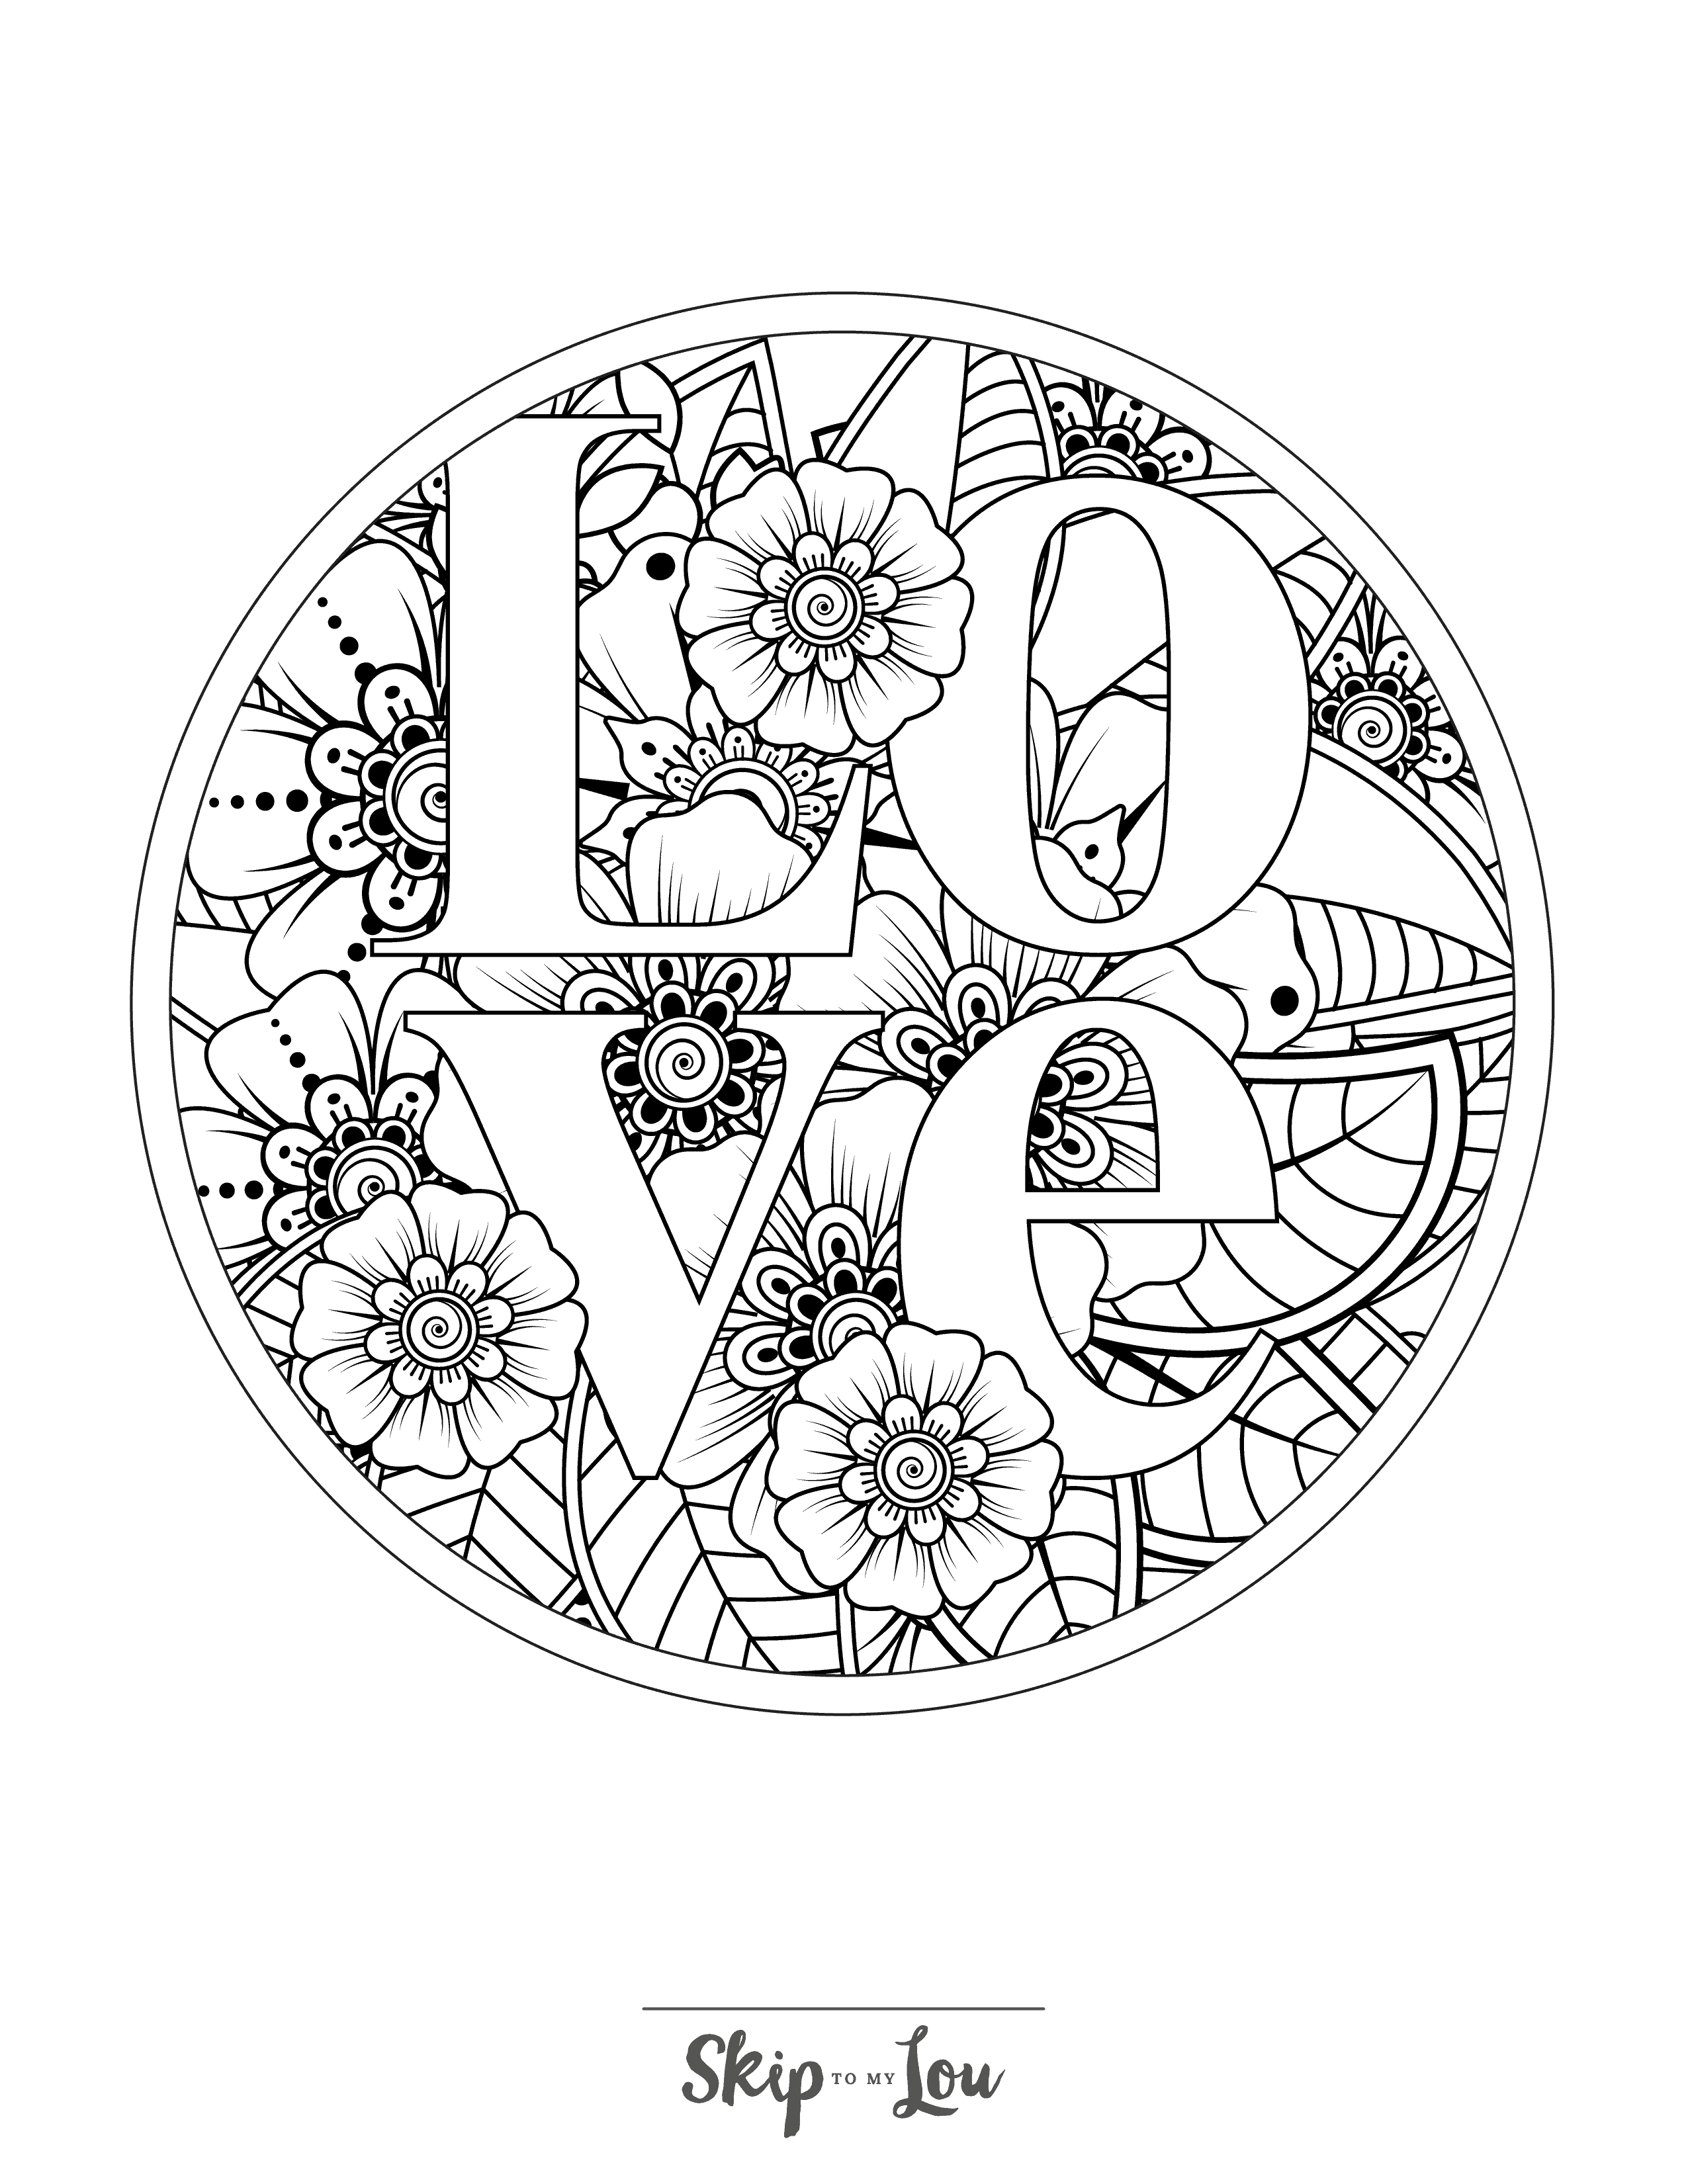 Fun free adult coloring pages skip to my lou